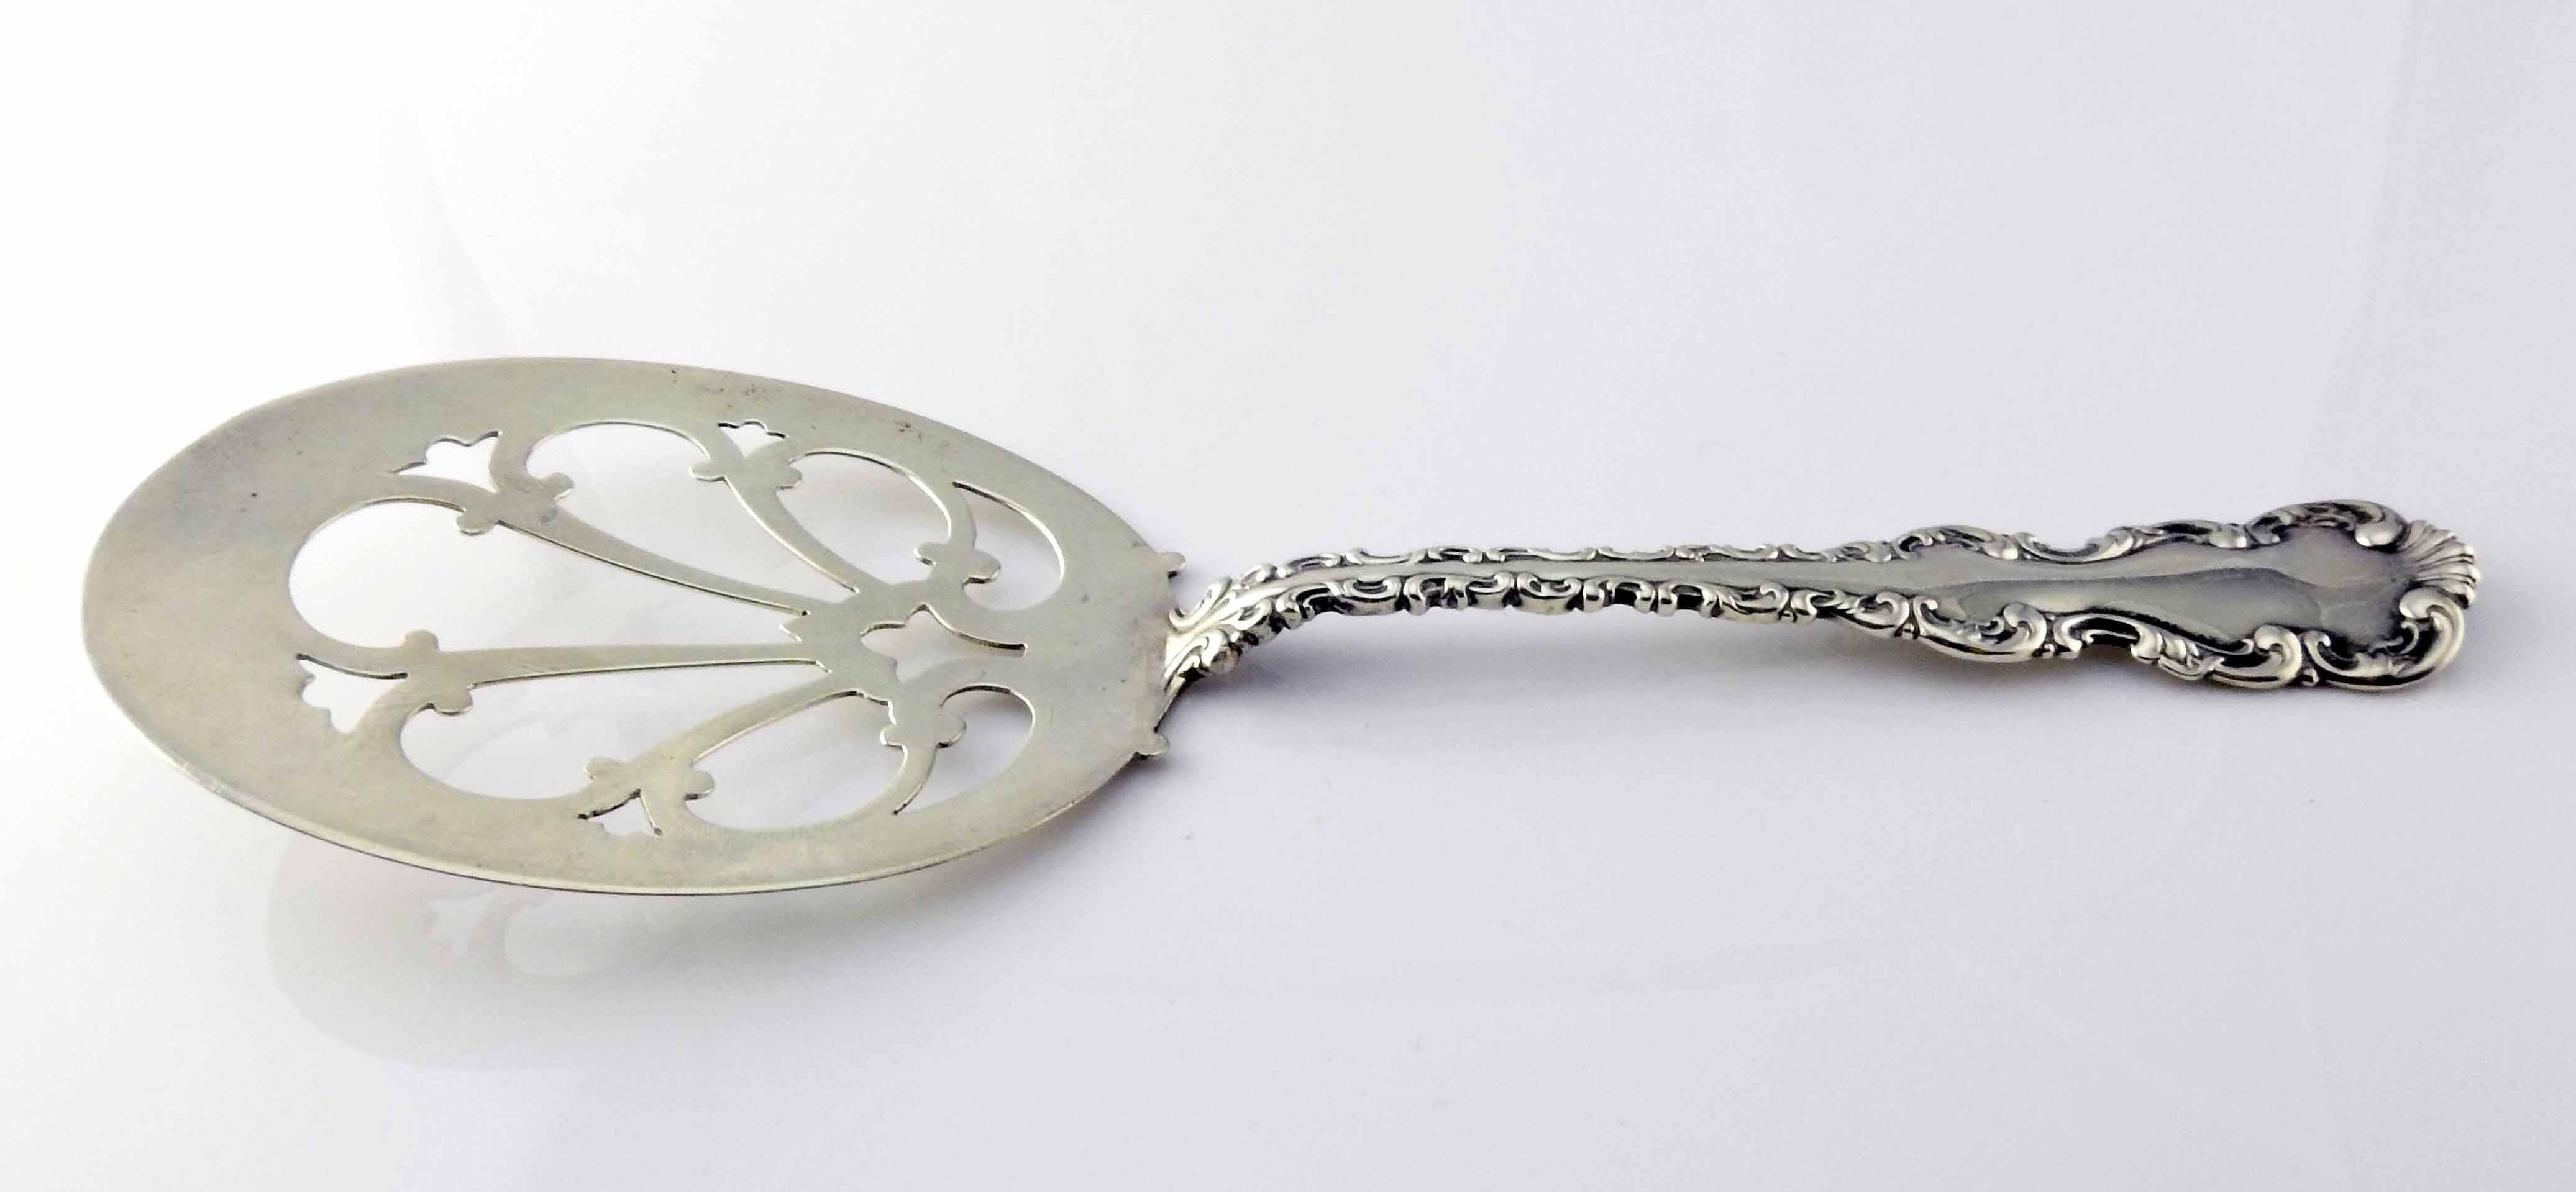 Antique Whiting Manufacturing Co Ster Silv Louis XV Pierced Egg Server #4387 For Sale 1